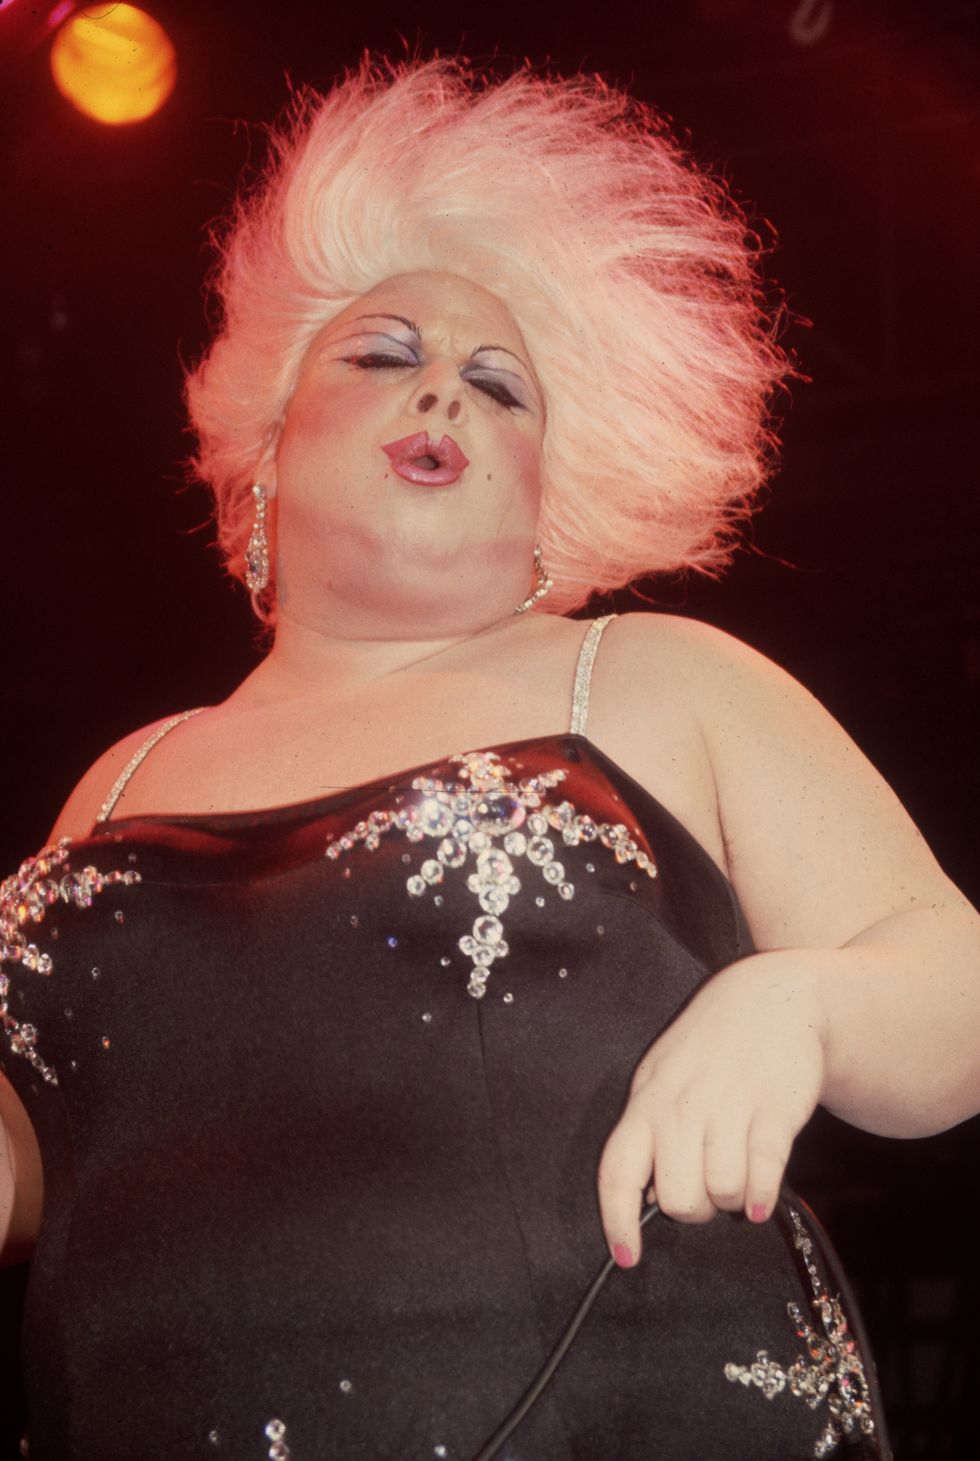 january 1983  american actor and drag queen divine born harris milstead performs at the red parrot nightclub in new york city divine is wearing a platinum blond wig, make up, and a black spaghetti strap dress  photo by tom gateshulton archivegetty images